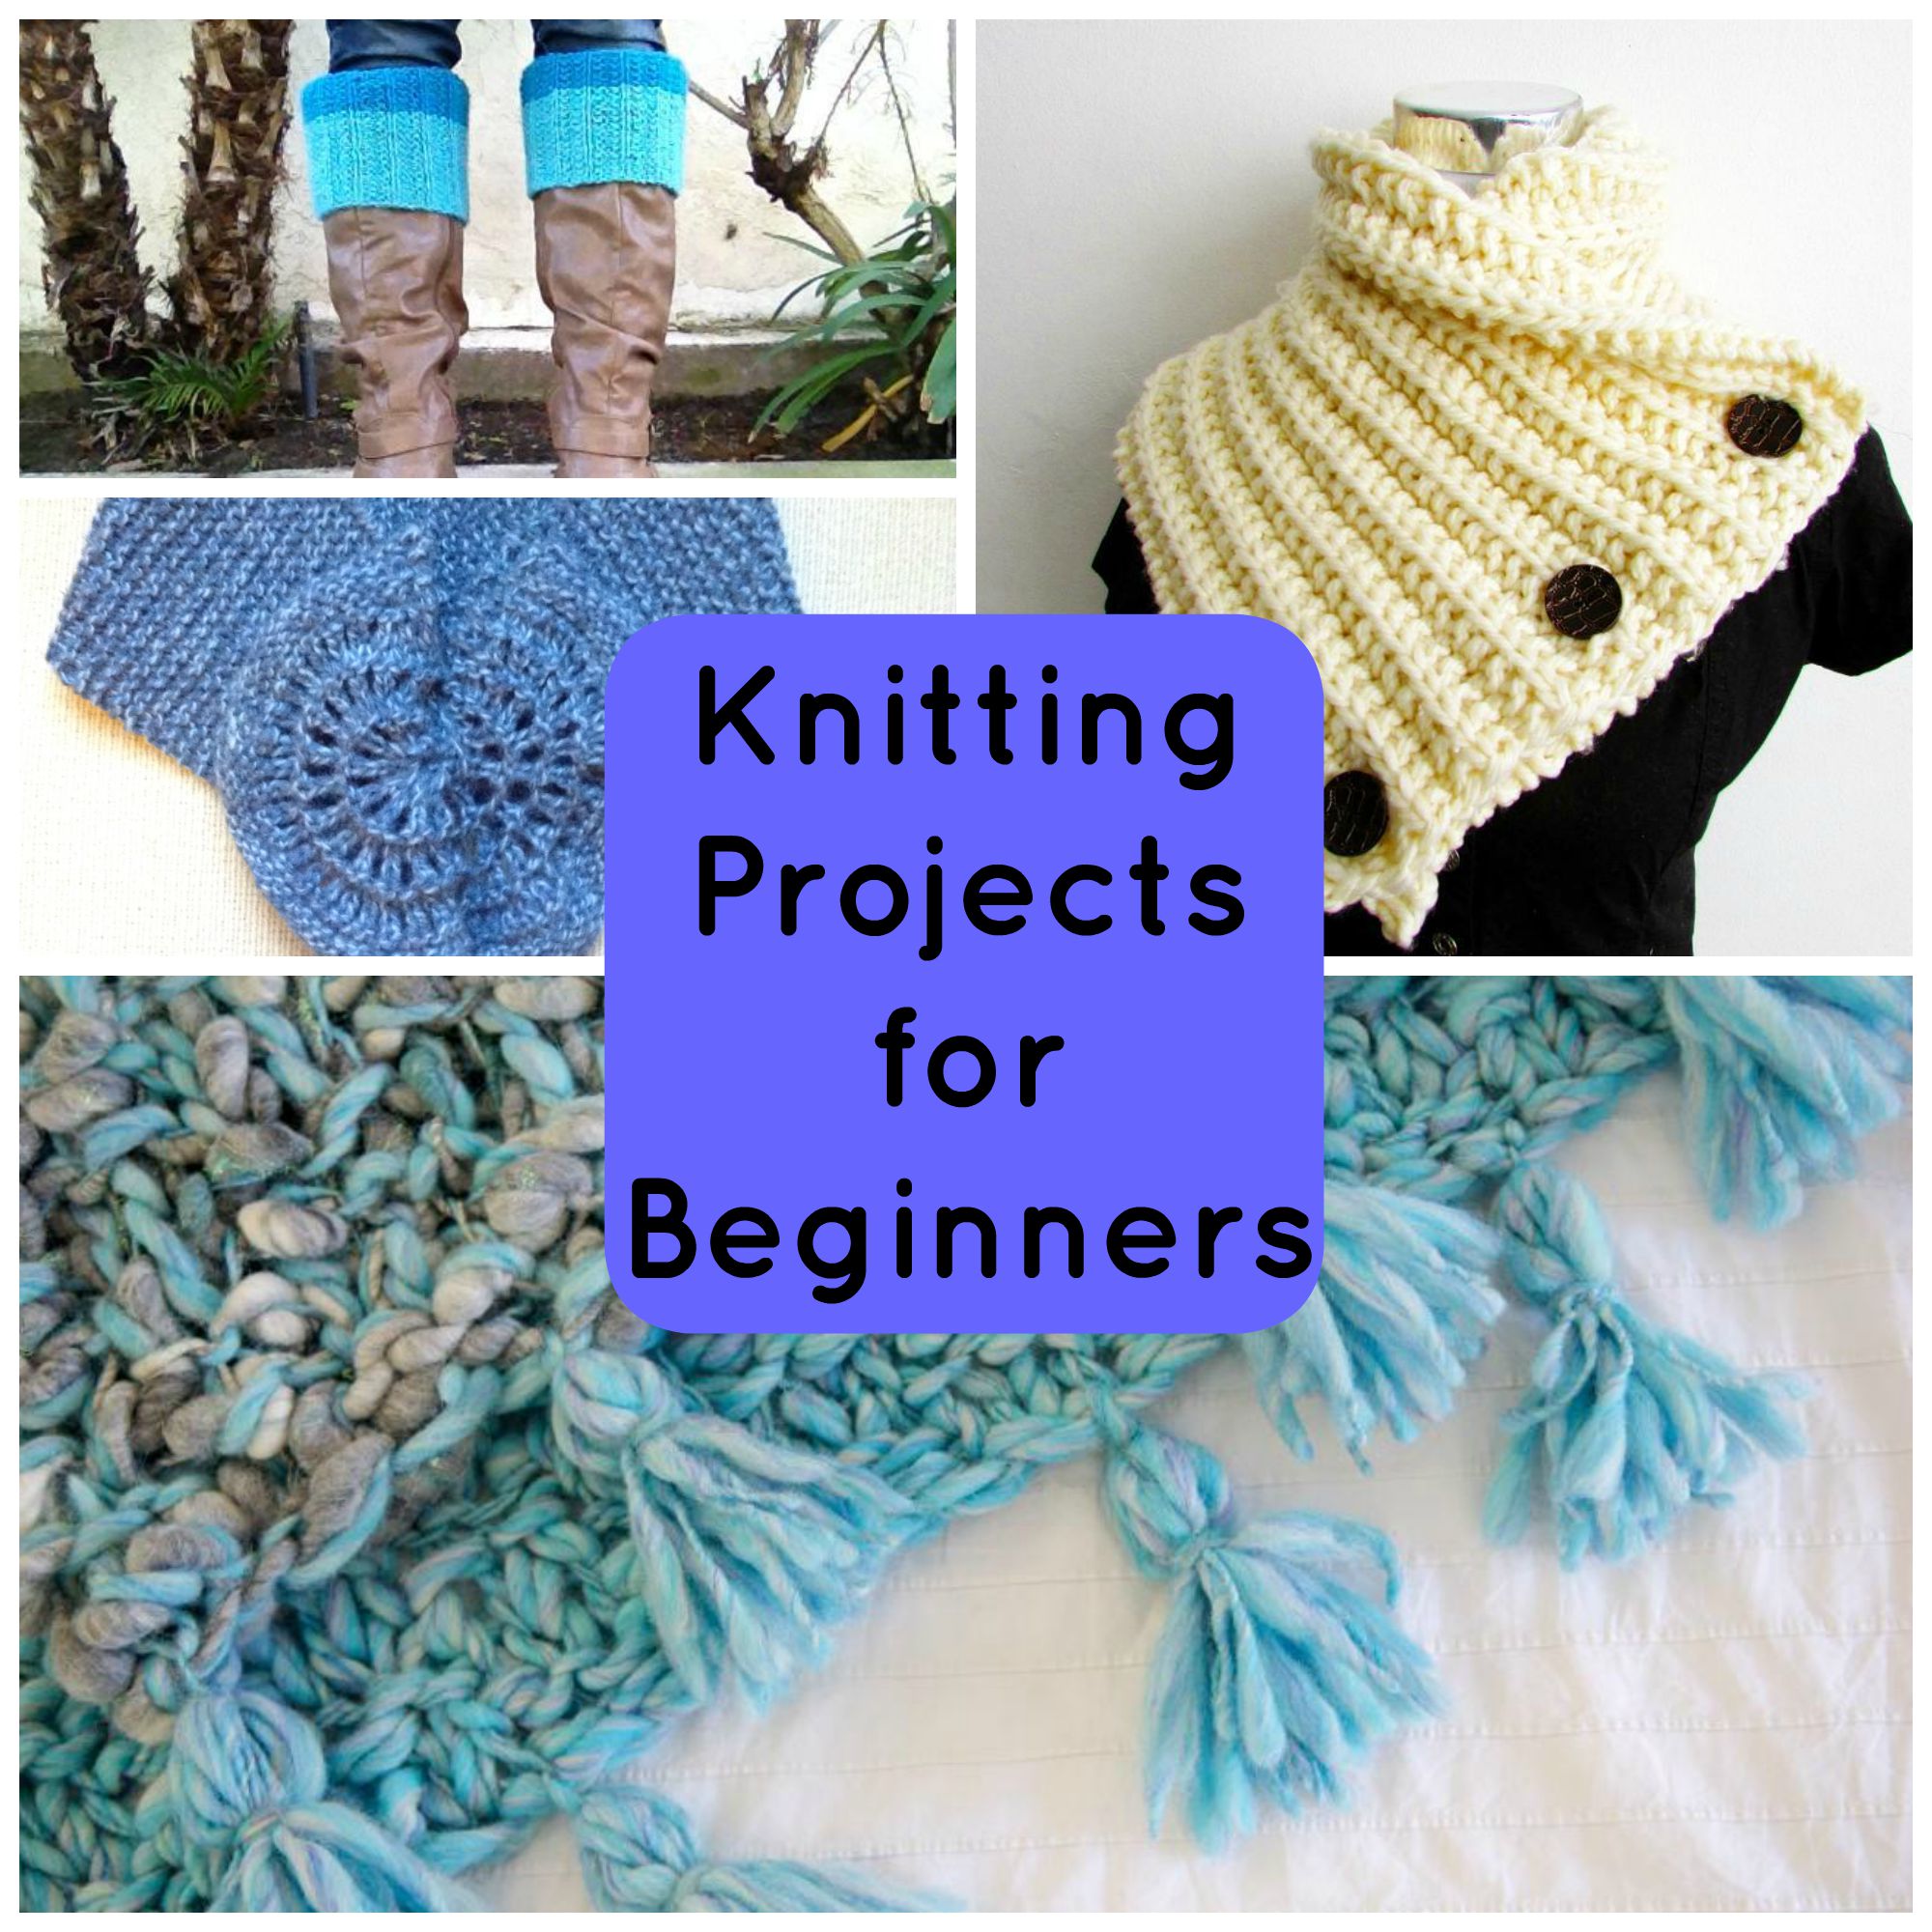 Knitting For Beginners get great knitting projects for beginners on craftsy! nvjwjqp